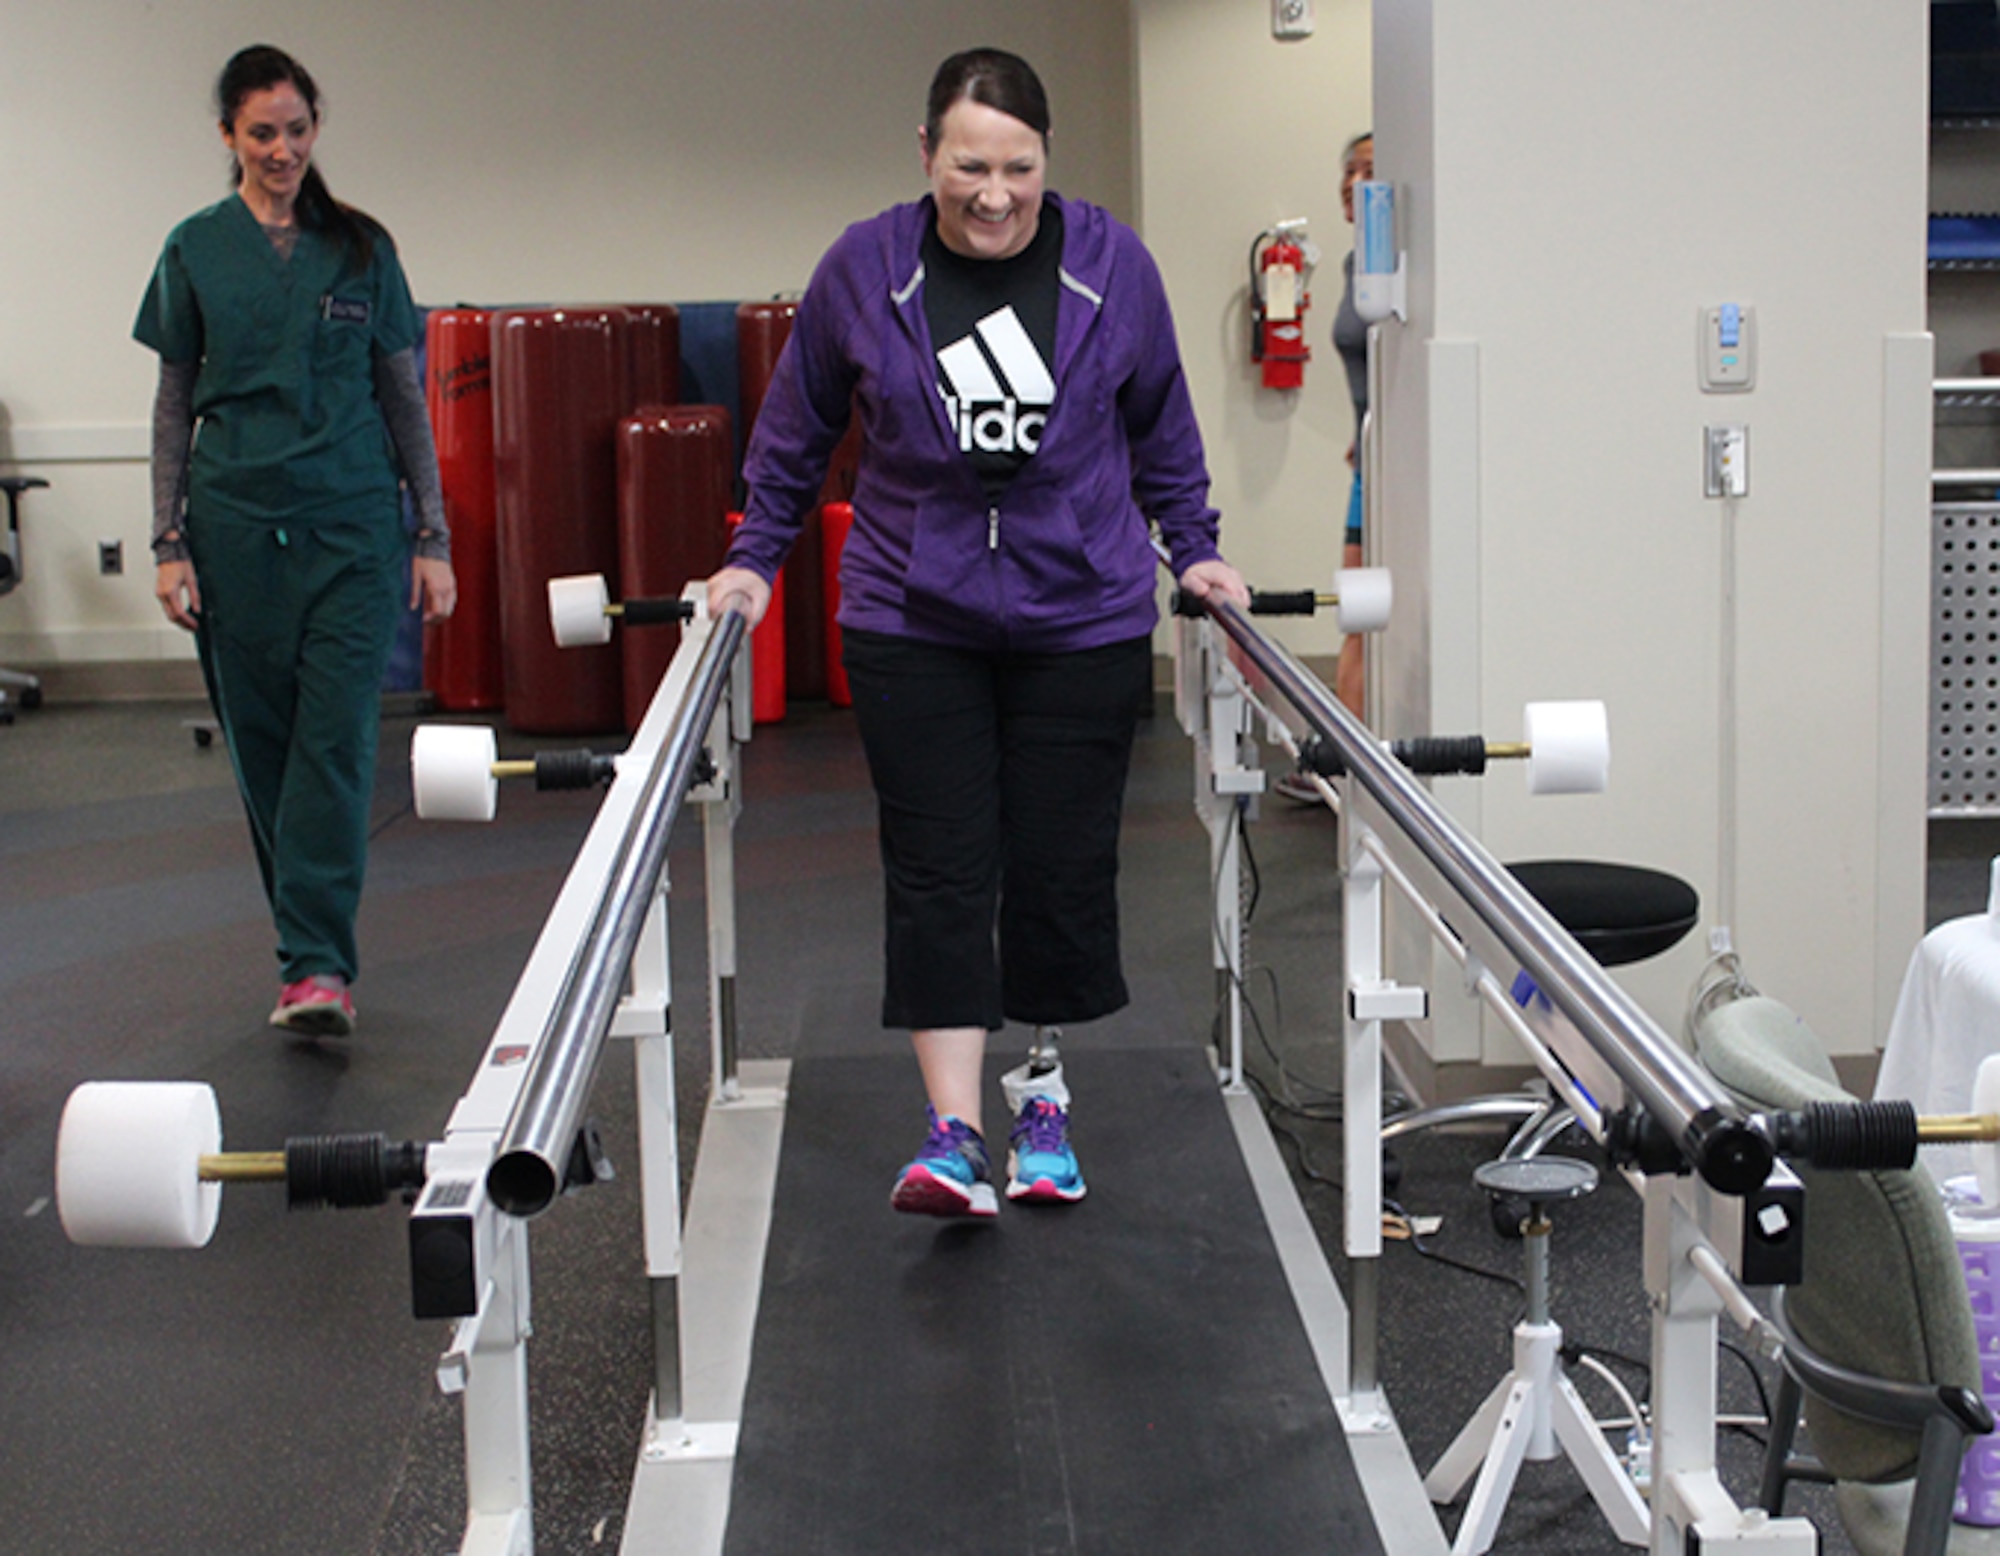 Maj. Stephanie Proellochs, a recent amputee, takes some of her first steps  in her new prosthesis, Nov. 15, 2017. During her physical therapy appointments, Proellochs engages in various exercises to ensure her comfort and safety with walking in a prosthesis. (U.S. Air Force by Karina Luis)